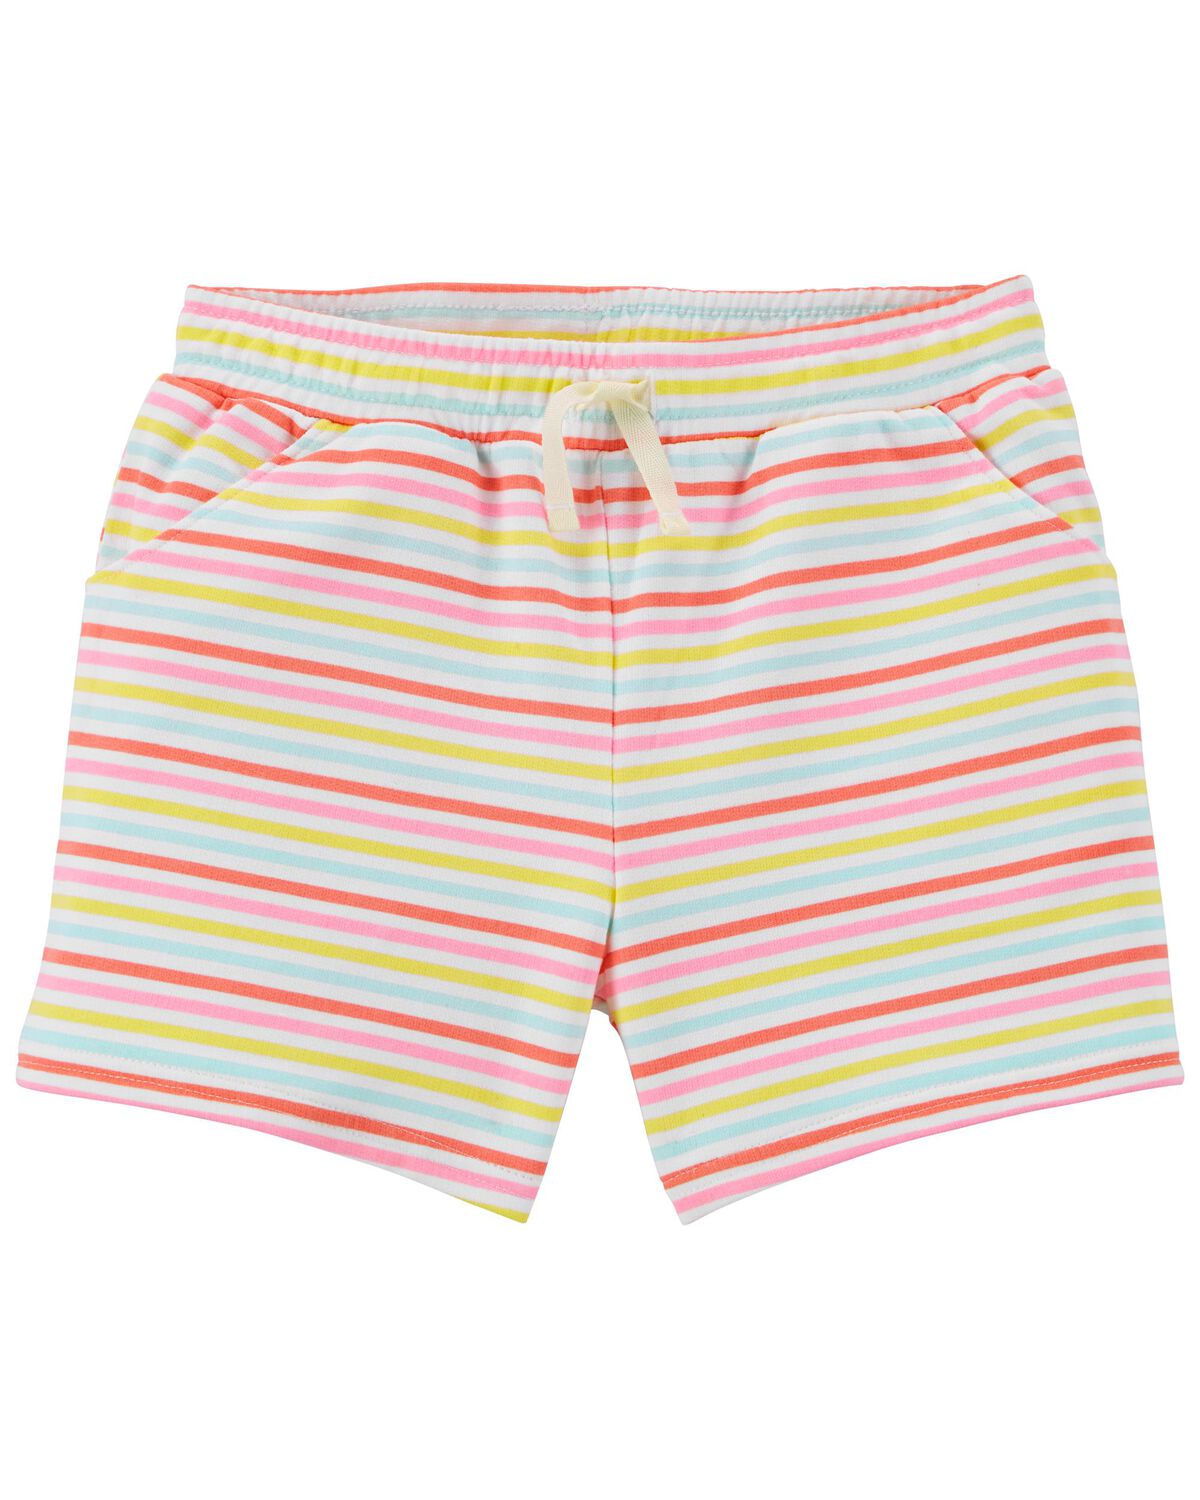 Striped Kid Striped Pull-On Shorts | carters.com